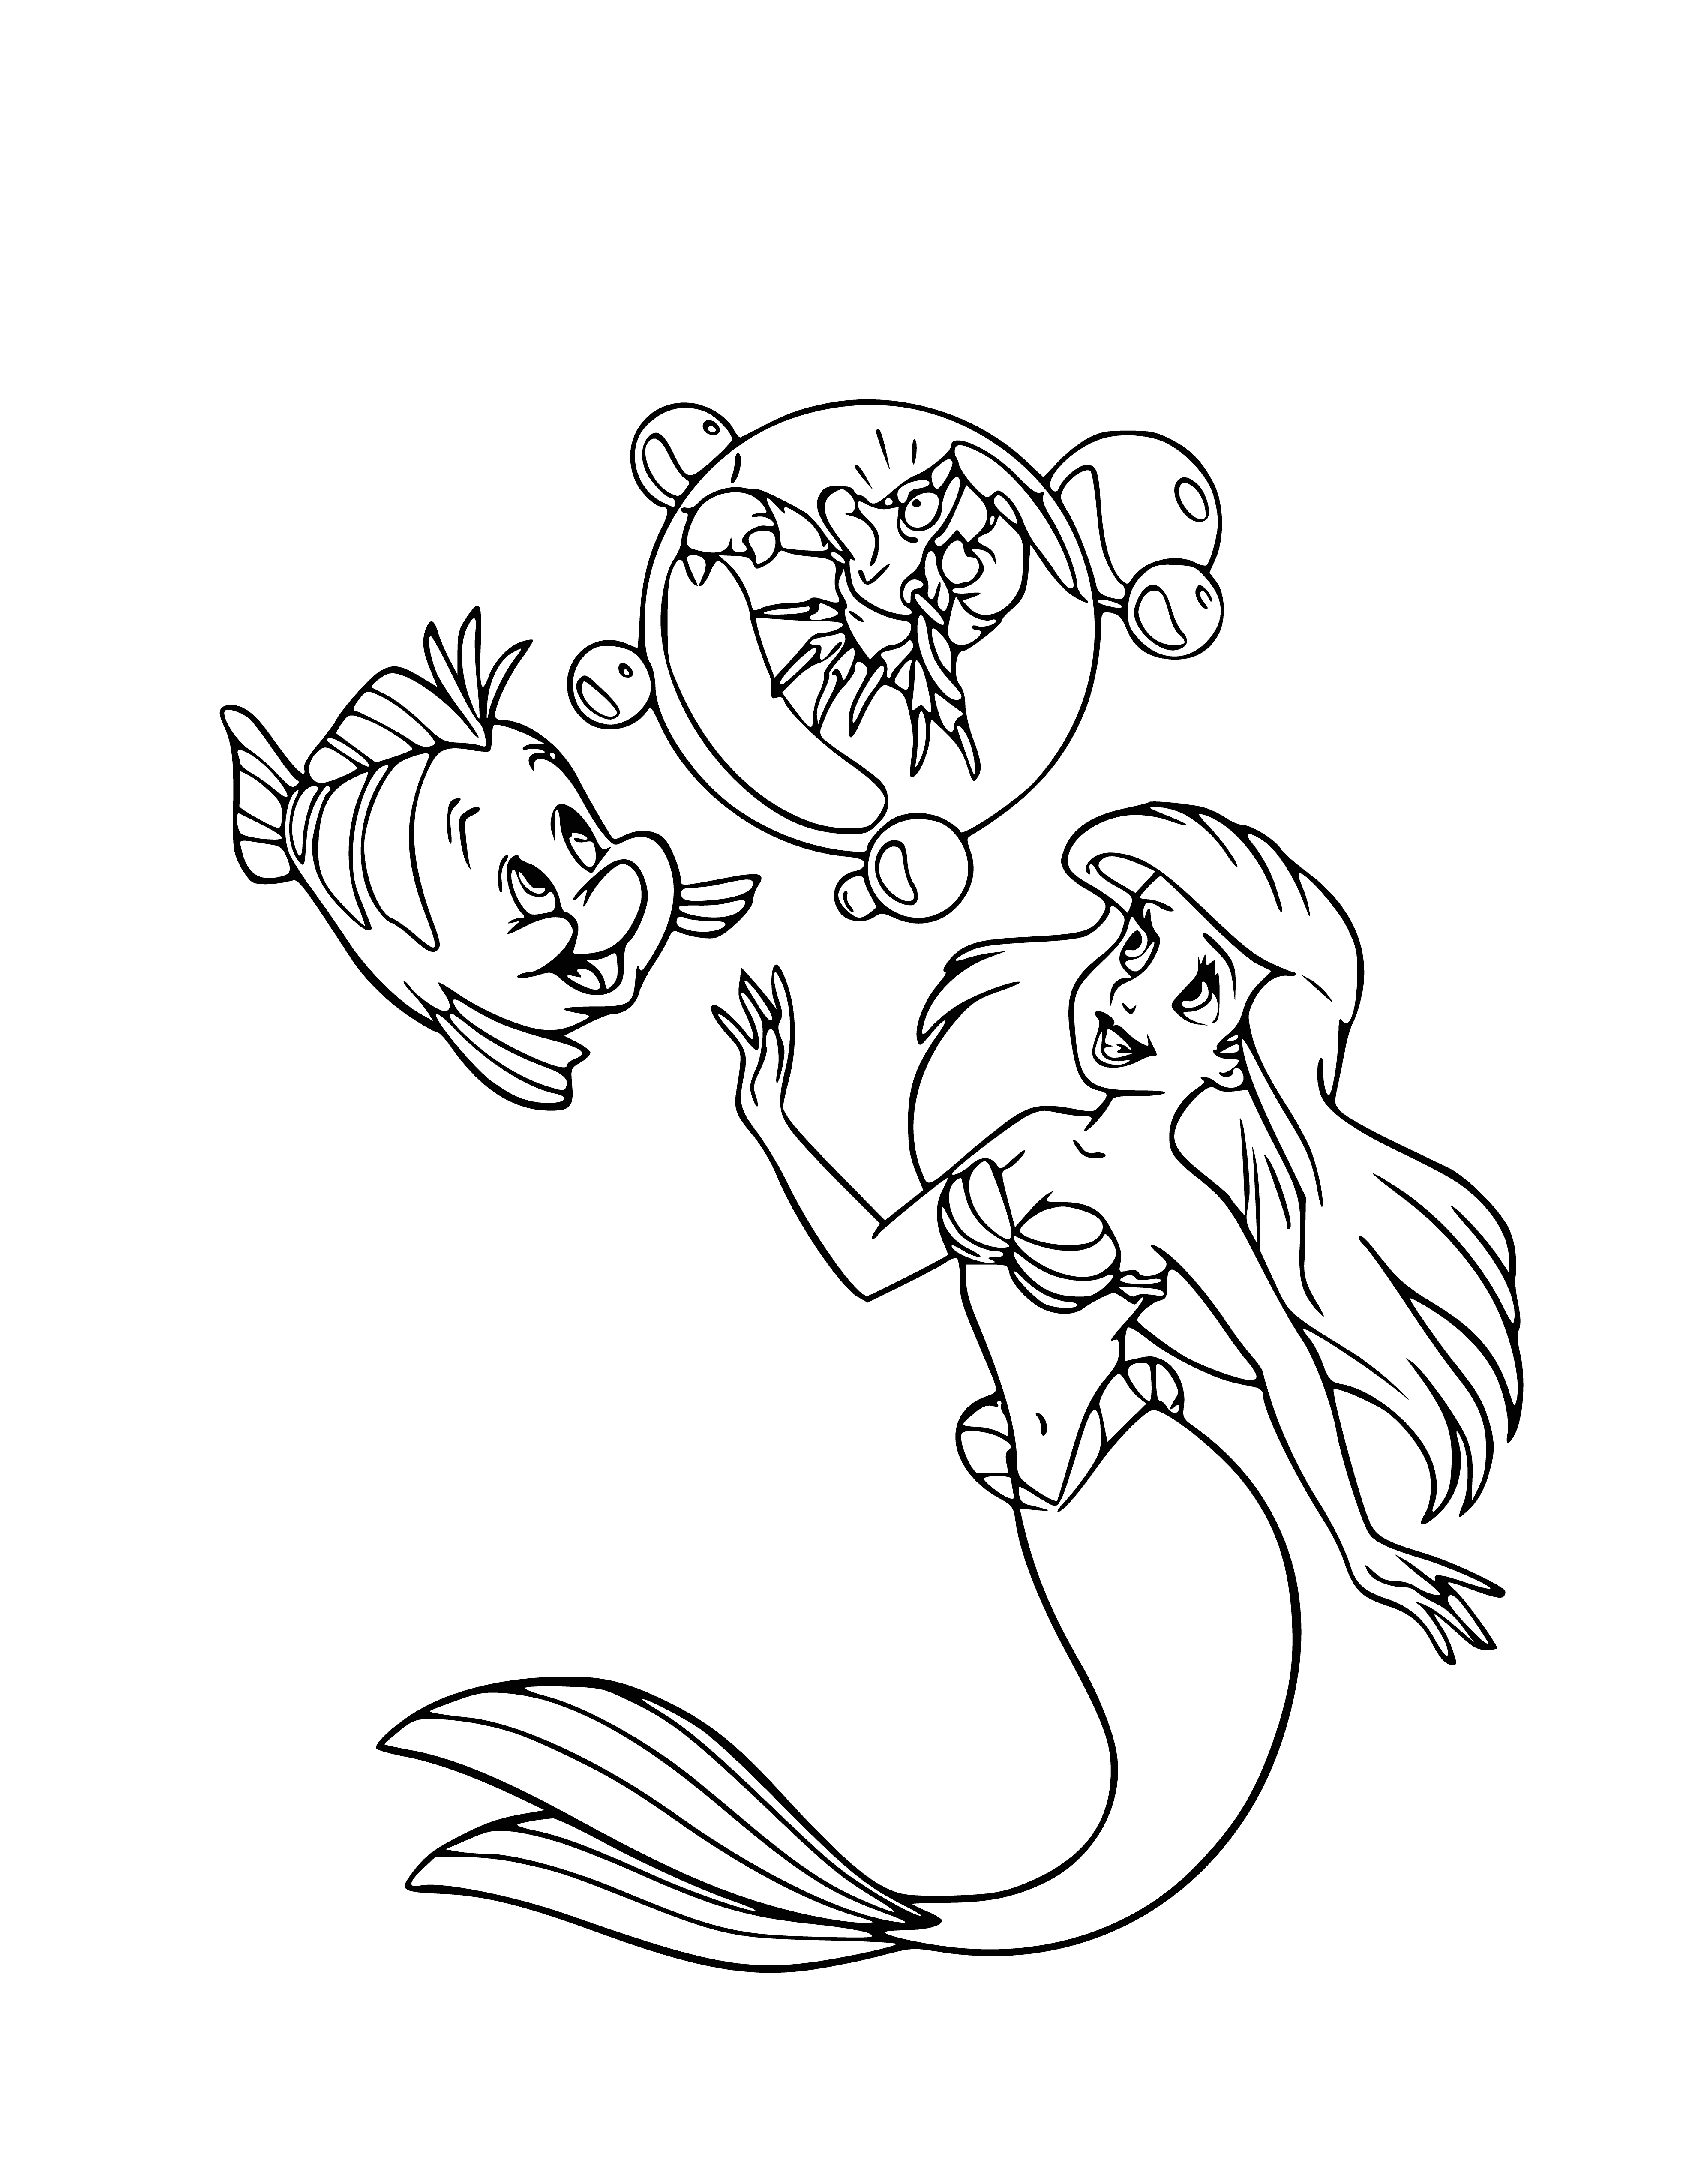 coloring page: Sebastian is a small, red lobster with black spots and pincers inside a bubble. #characterdescription